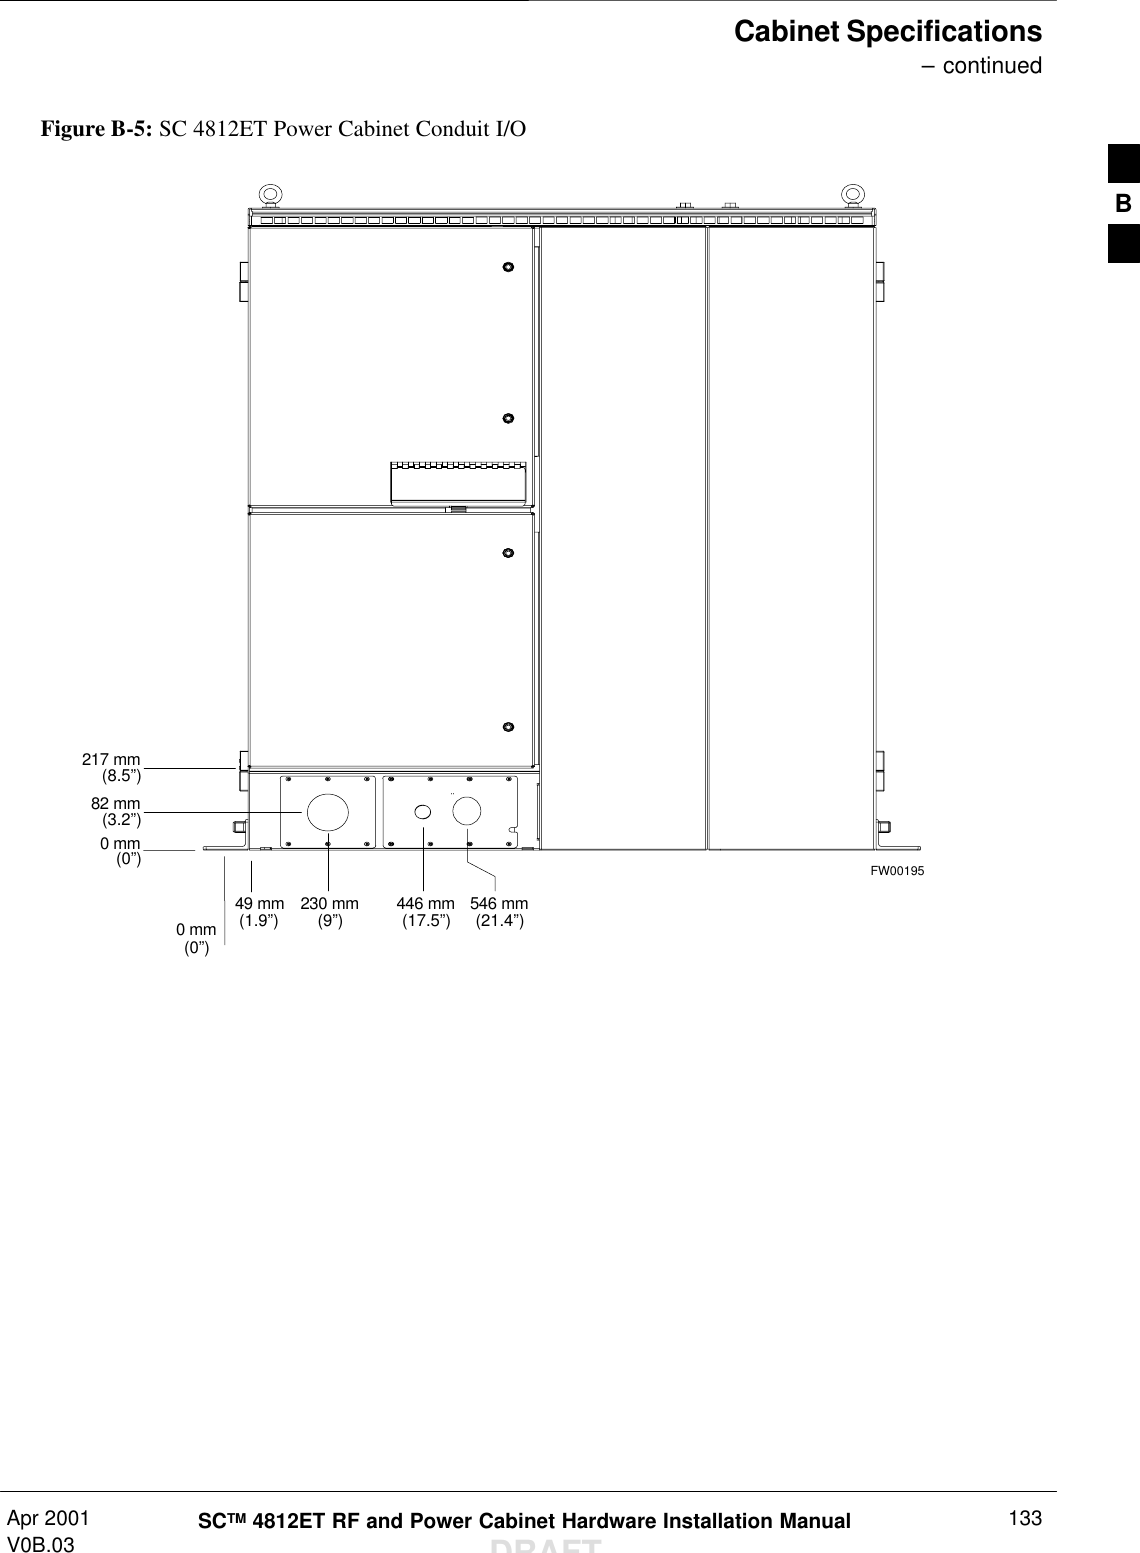 Cabinet Specifications – continuedApr 2001V0B.03 SCTM 4812ET RF and Power Cabinet Hardware Installation ManualDRAFT1330 mm(0”)0 mm(0”)230 mm(9”)446 mm(17.5”)546 mm(21.4”)82 mm(3.2”)Figure B-5: SC 4812ET Power Cabinet Conduit I/O49 mm(1.9”)217 mm(8.5”)FW00195B